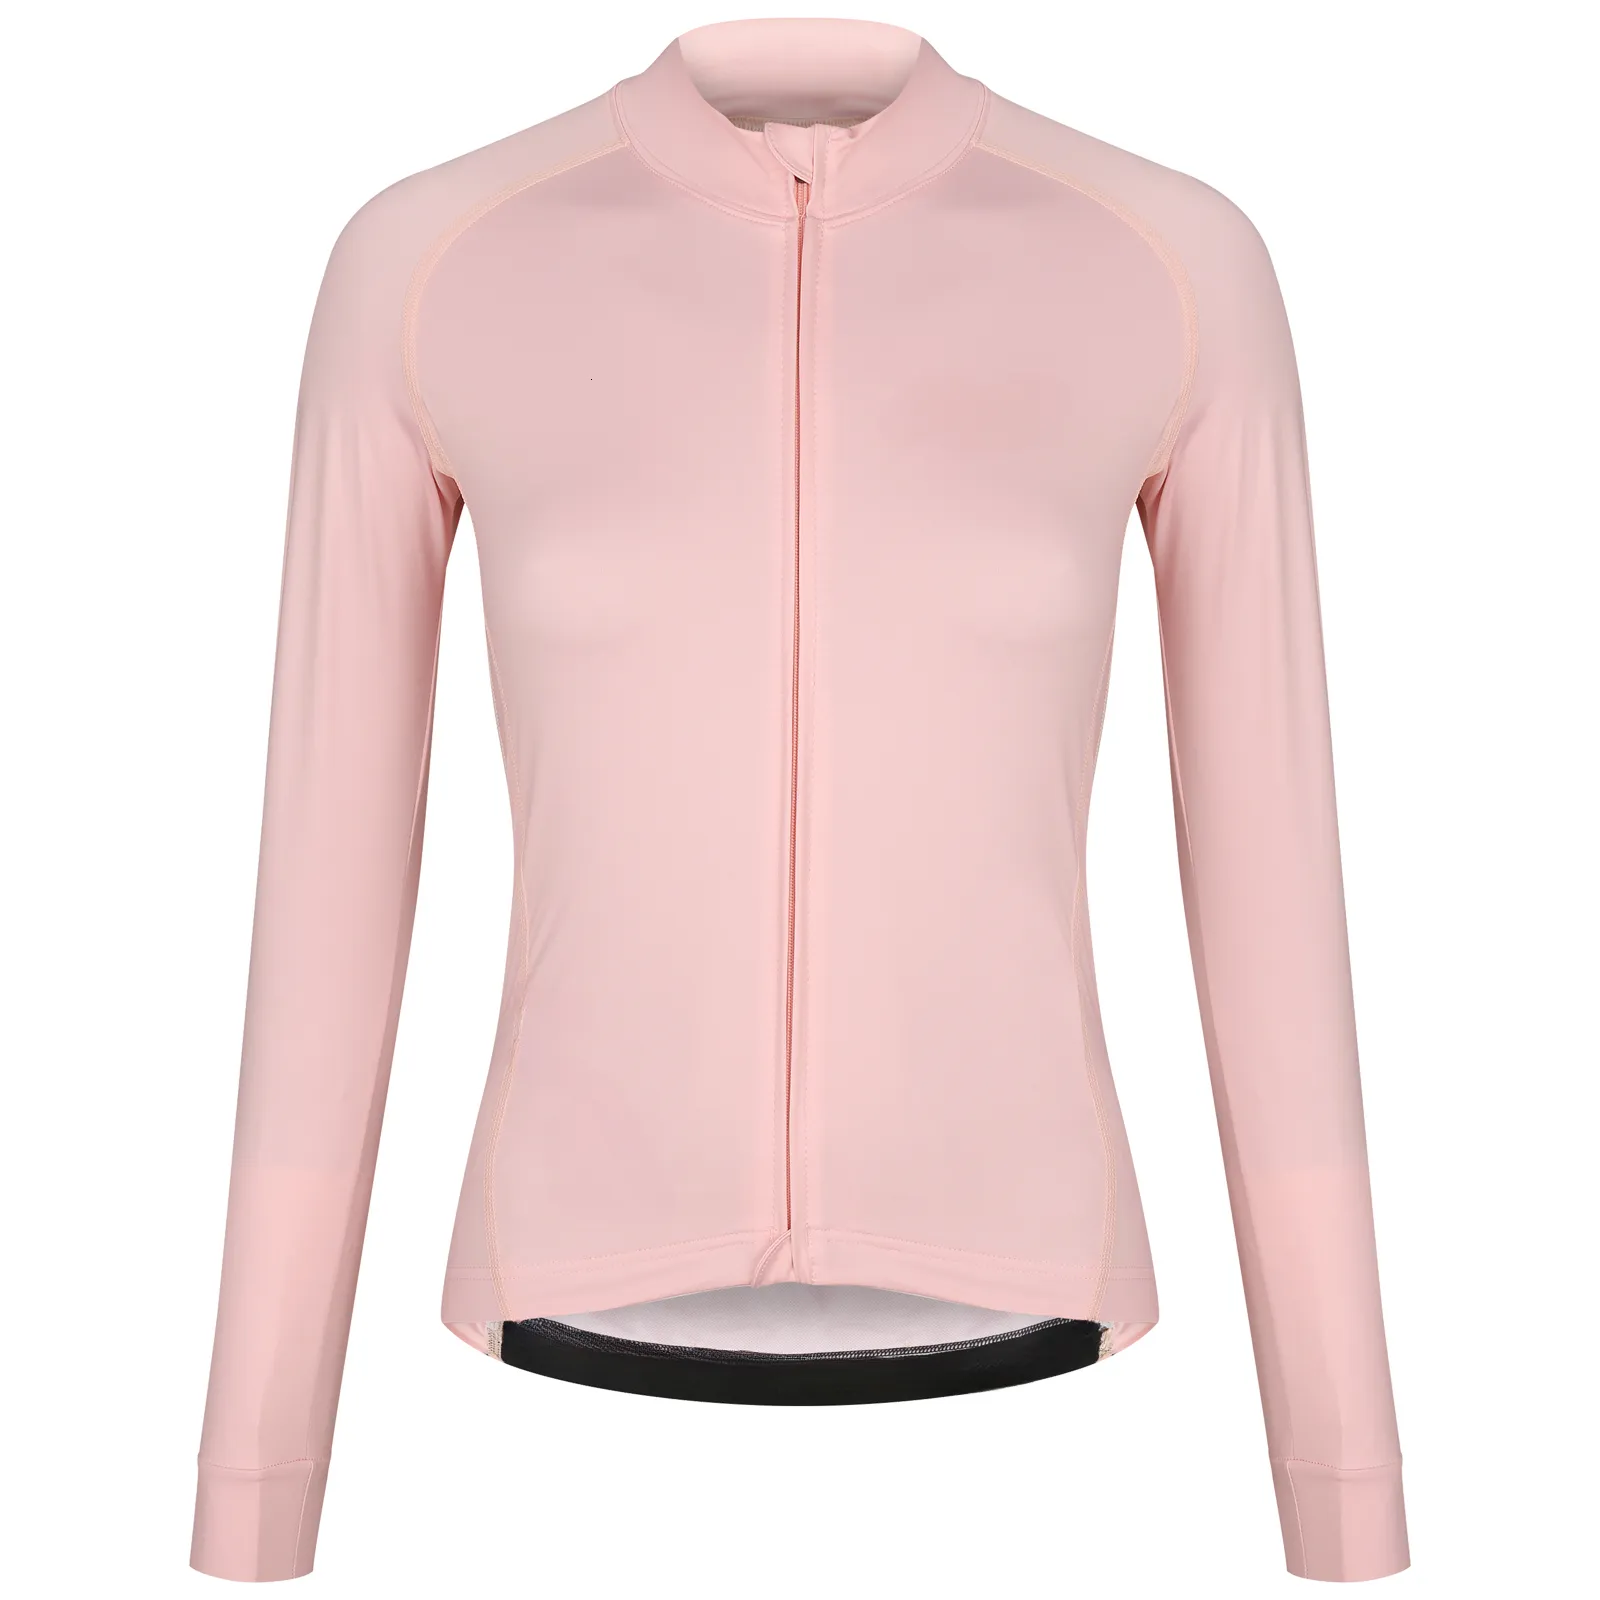 Cycling Shirts Top s Jersey Long Sleeve Spring And Autumn Bicycle Running Thin Jacket Roupa Ciclismo 230815